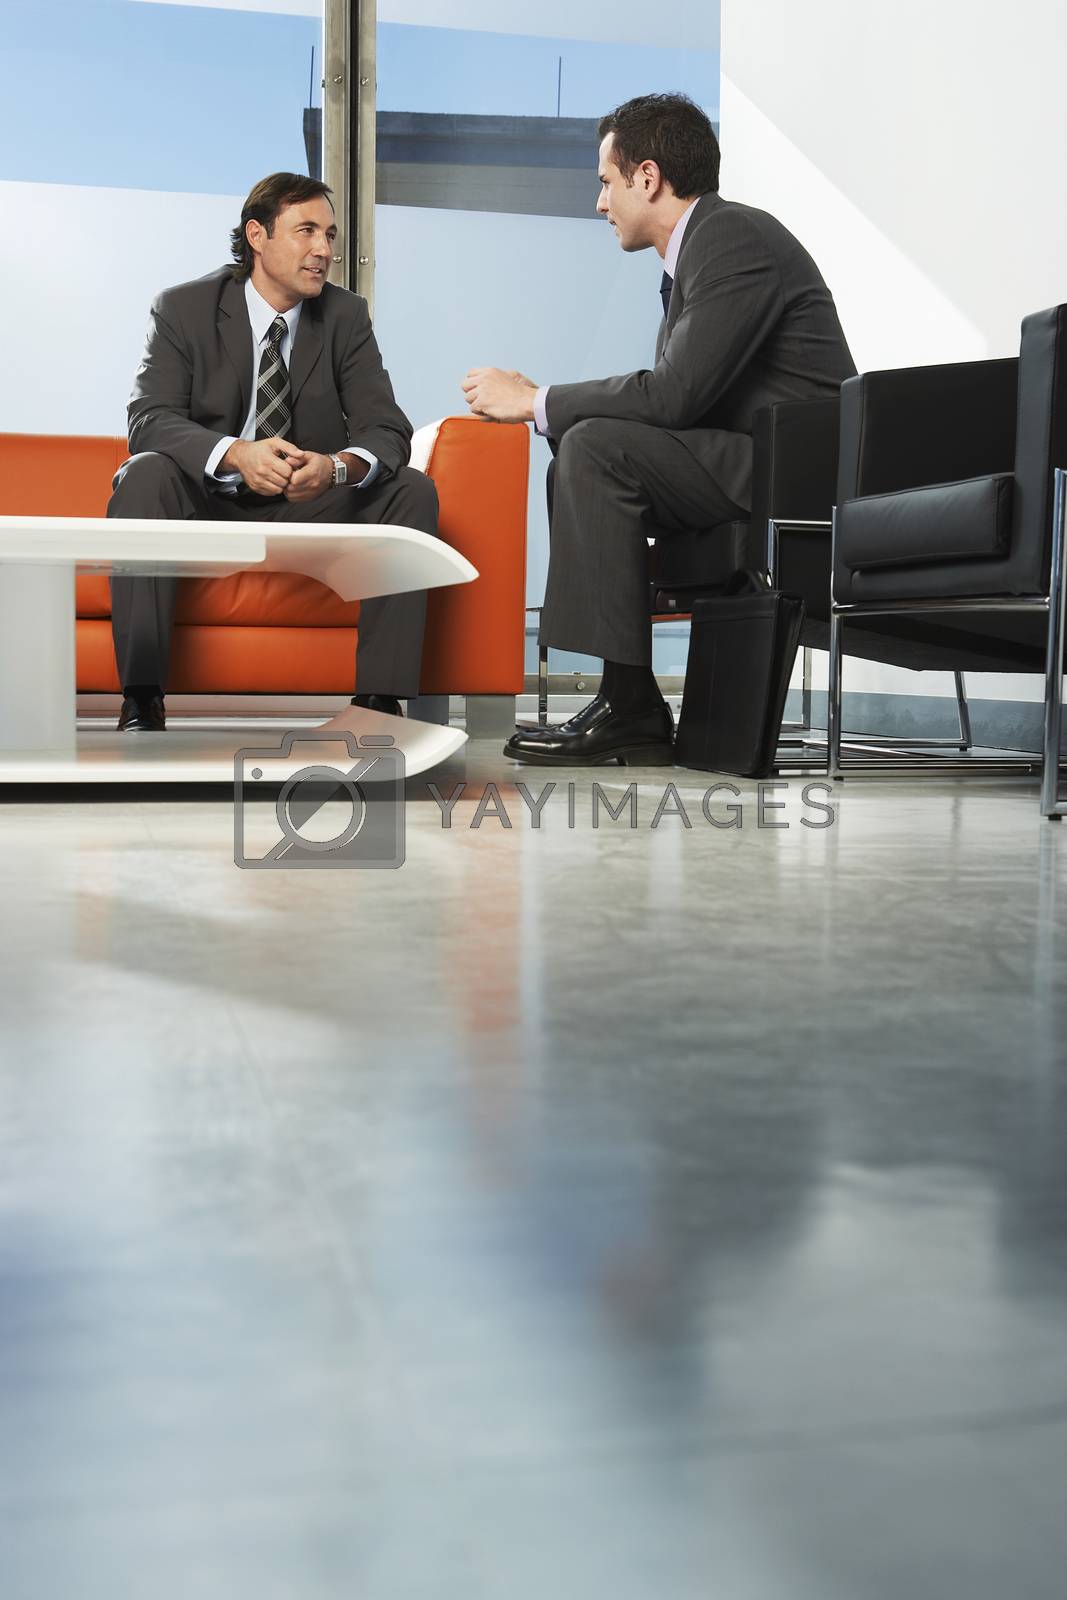 Royalty free image of Two businessmen having meeting in office lobby by moodboard